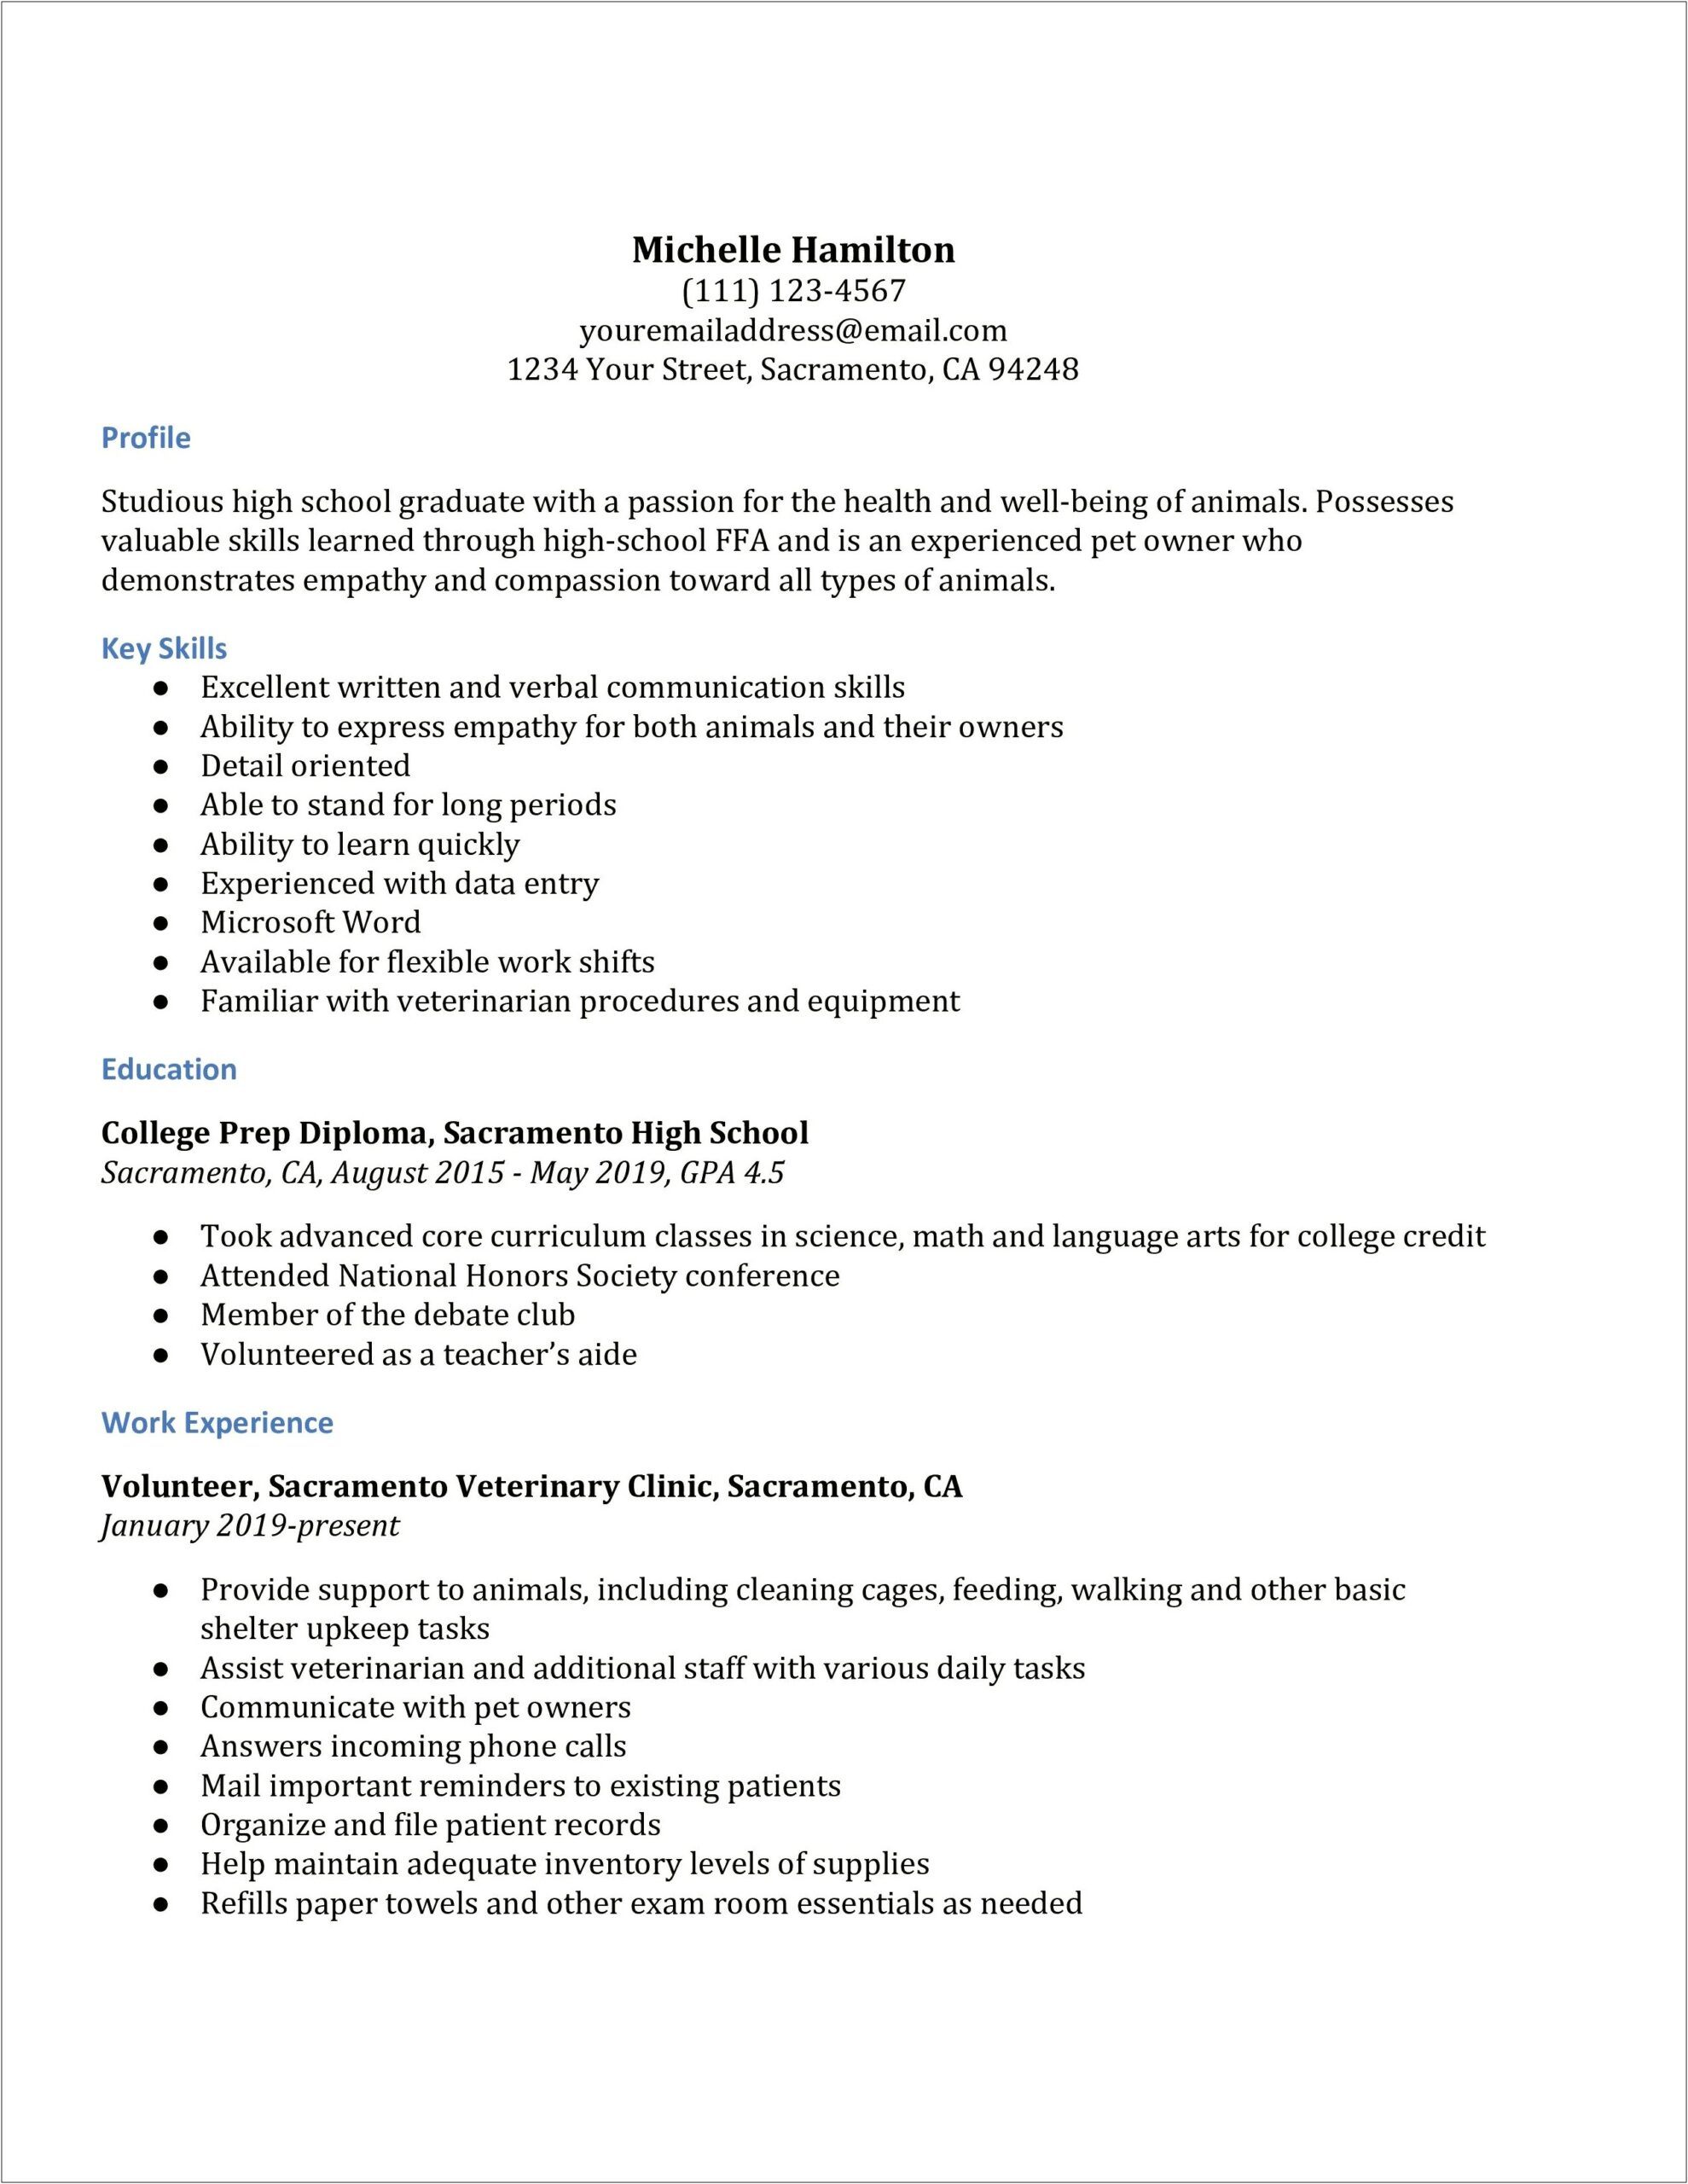 Express Experience With Shift Work On Resume